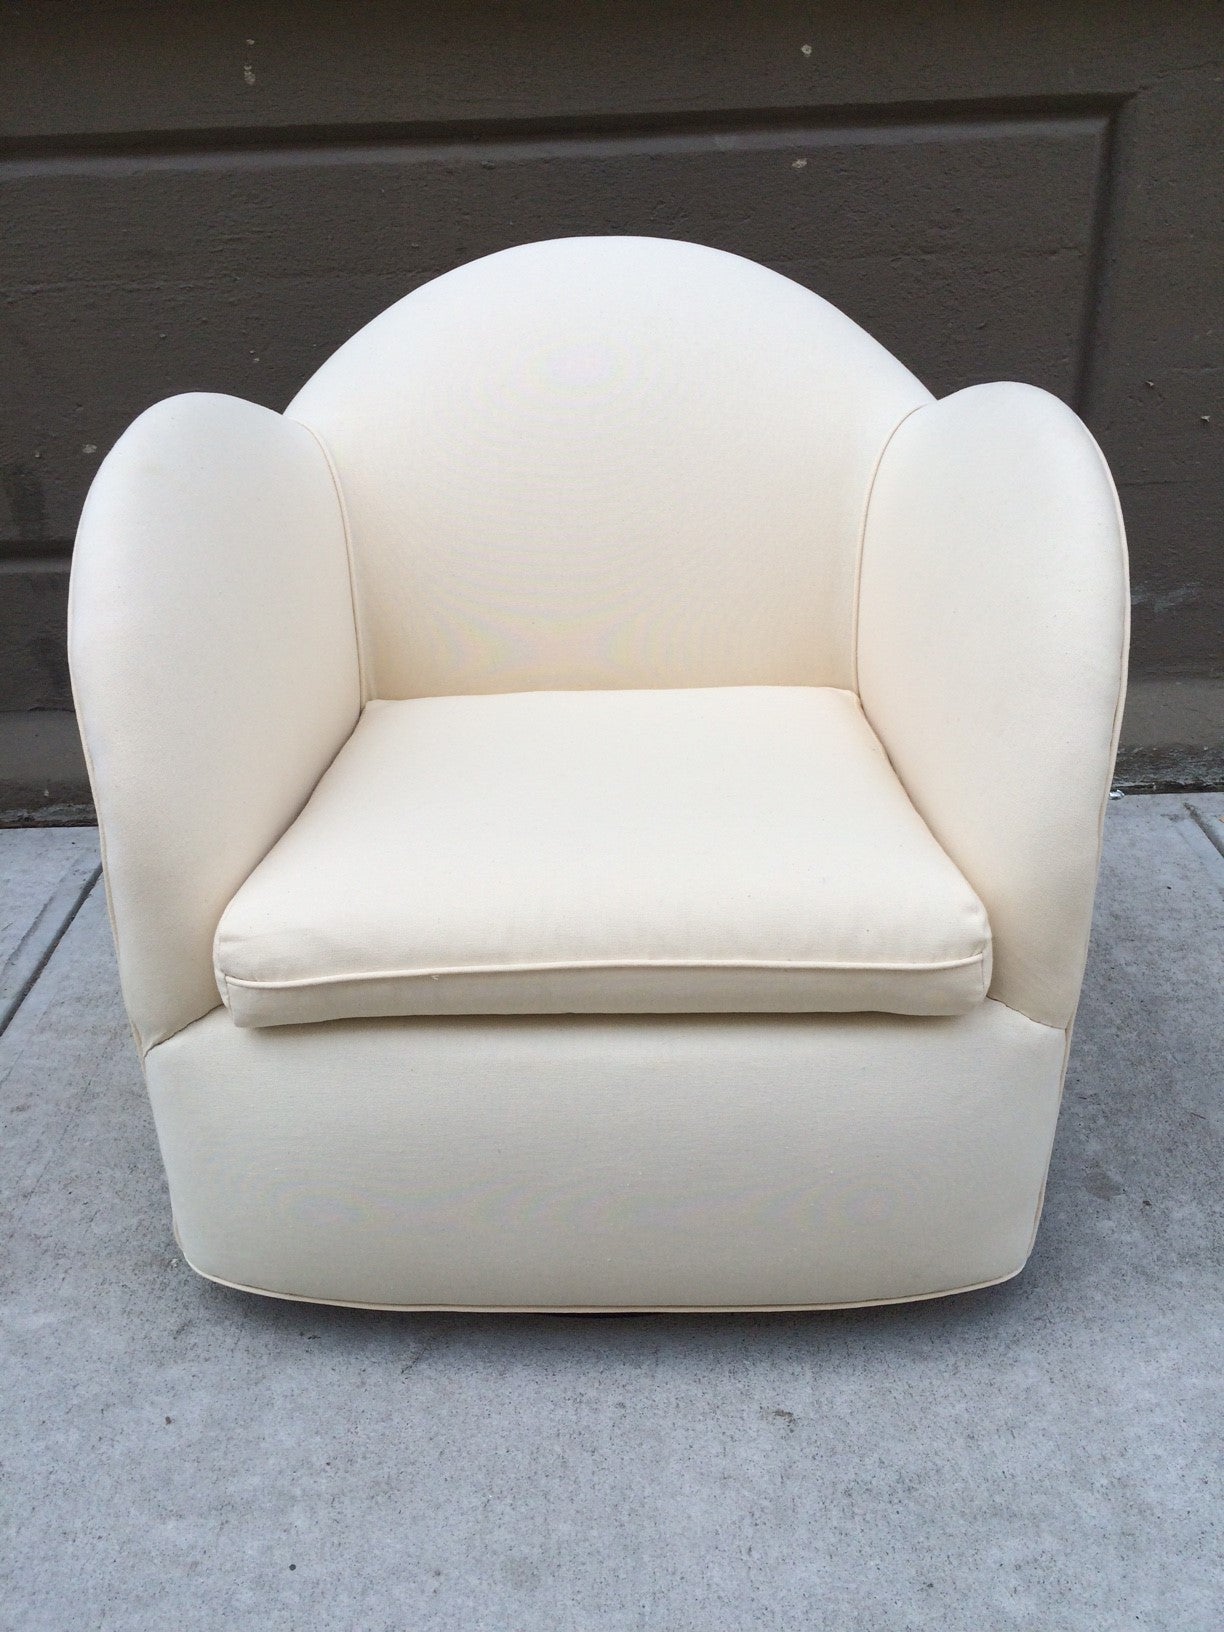 Pair of Art Deco Swivel Cloud Lounge Chairs.  Upholstered in a linen blend fabric. Has a black lacquered base.